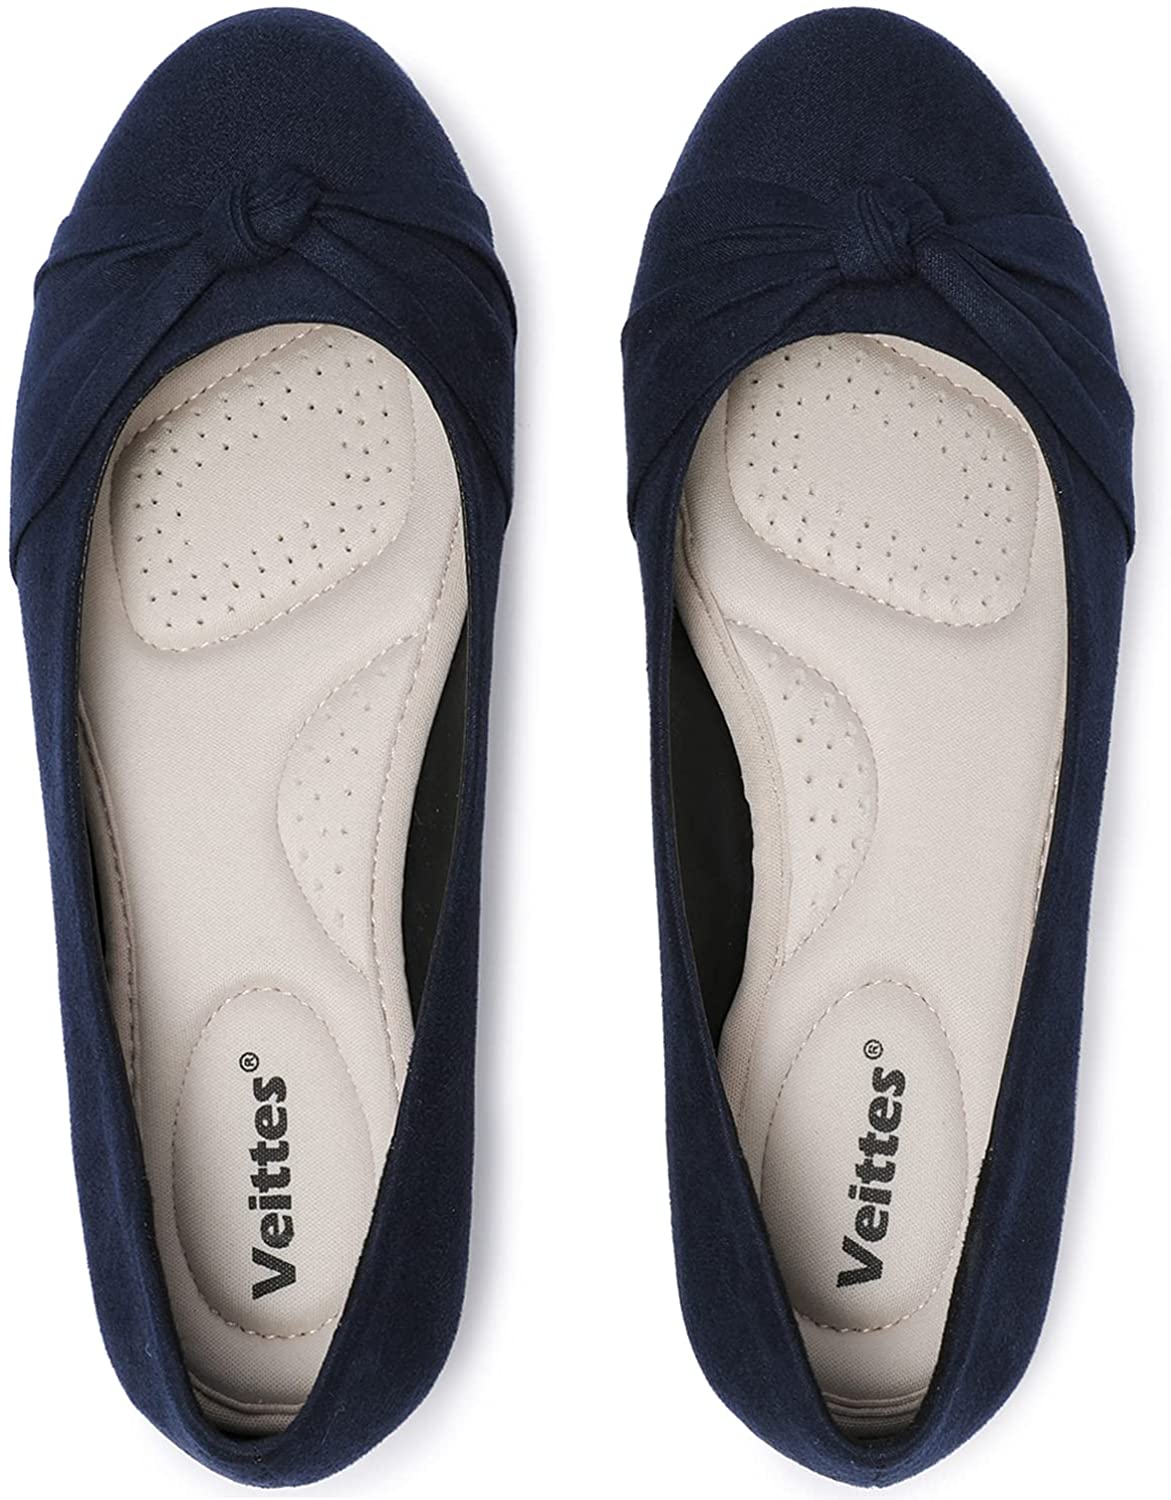 2011005,WR/MF,8 M Veittes Women's Flat Shoes Round Toe Classic Casual Cute Suede Ballet Flats. 